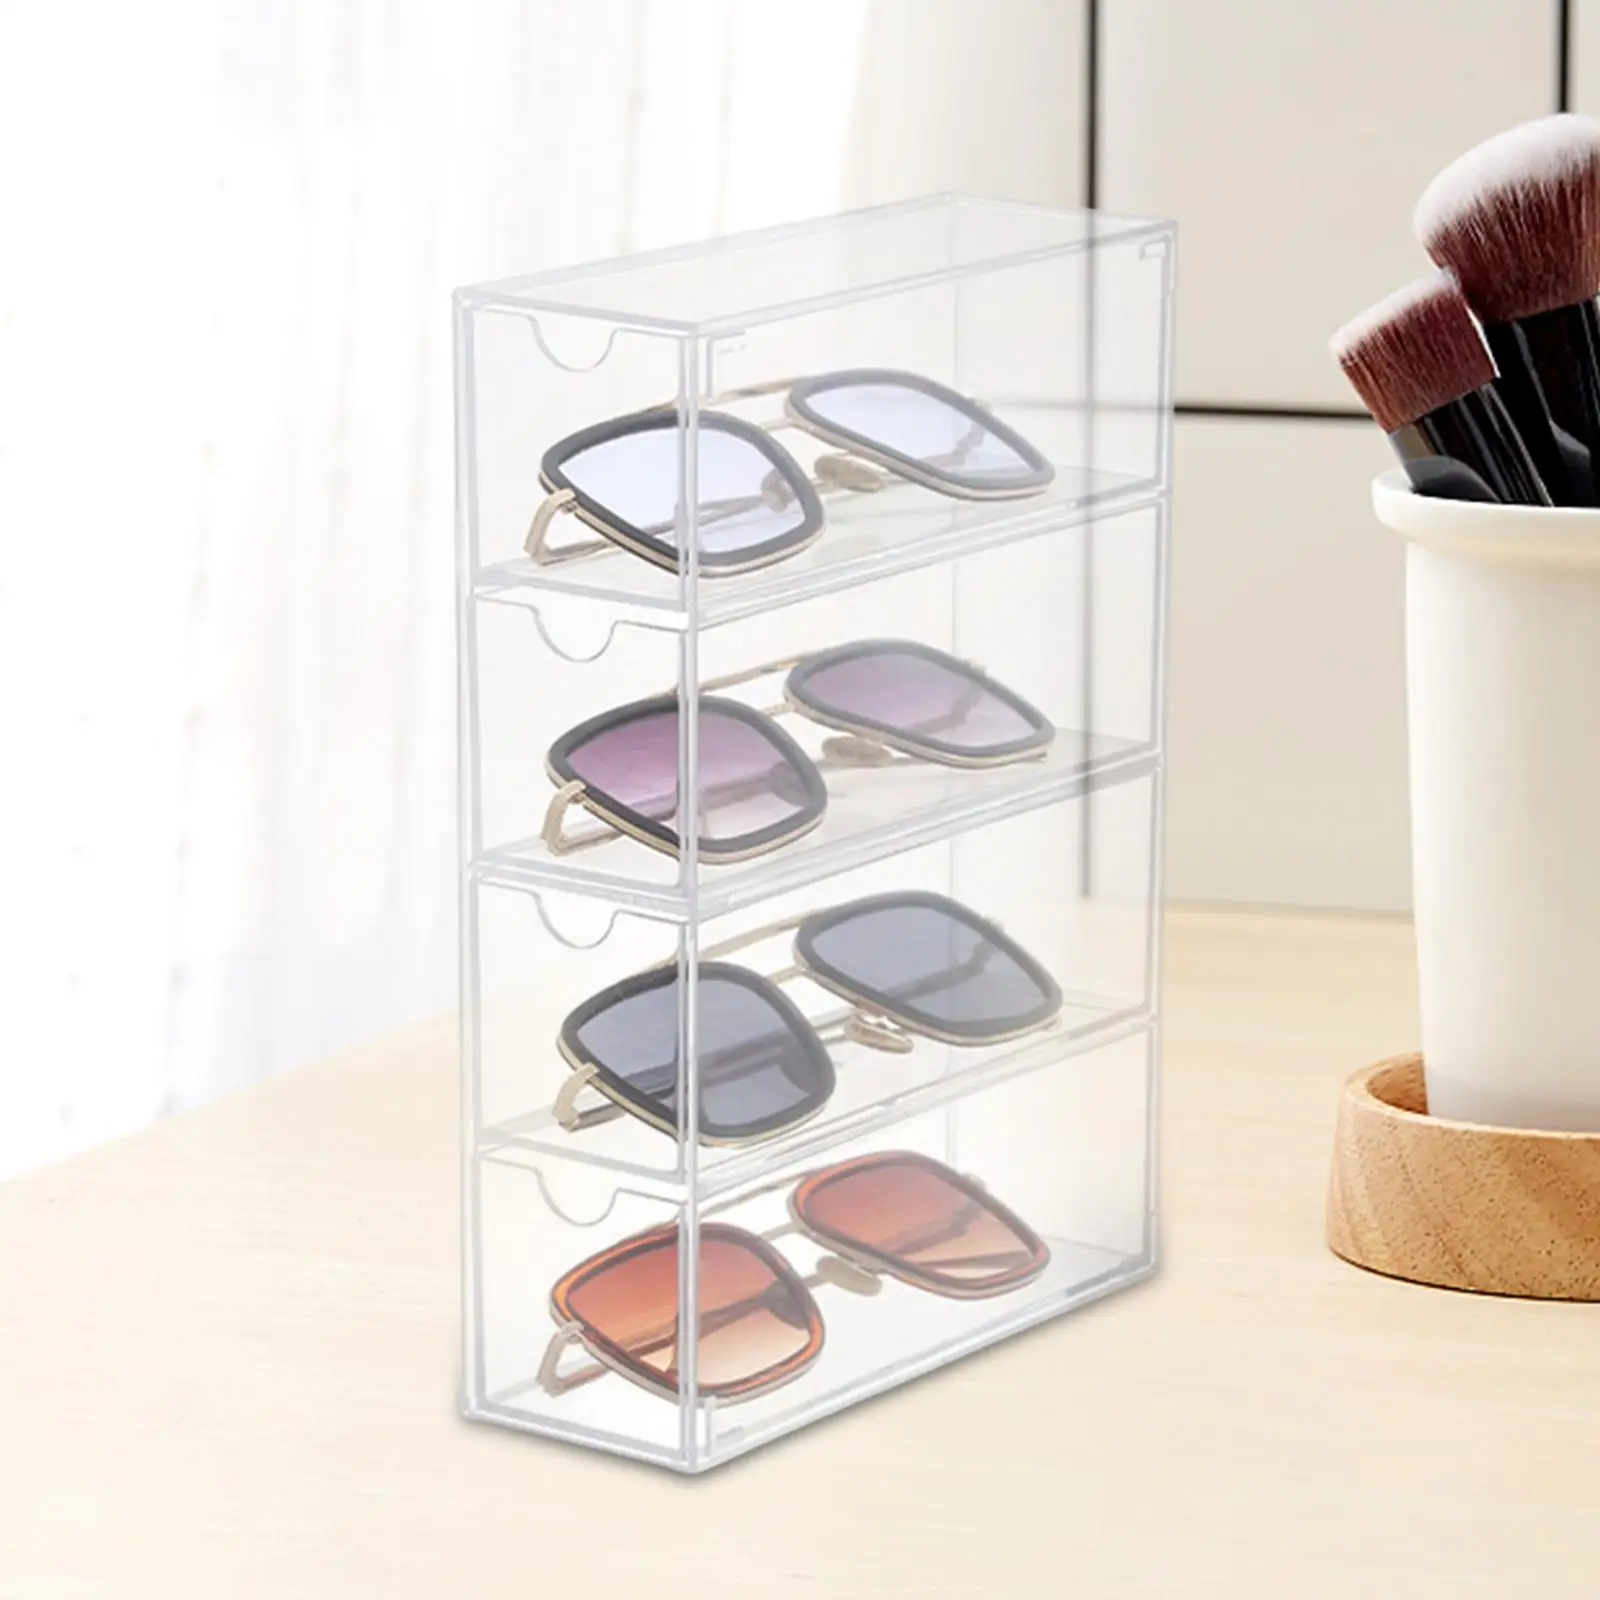 Makeup Organizer 4 Drawers Acrylic Clear Storage Box Container Cosmetic Desk Rack for Countertops Home Glasses Lipstick Office